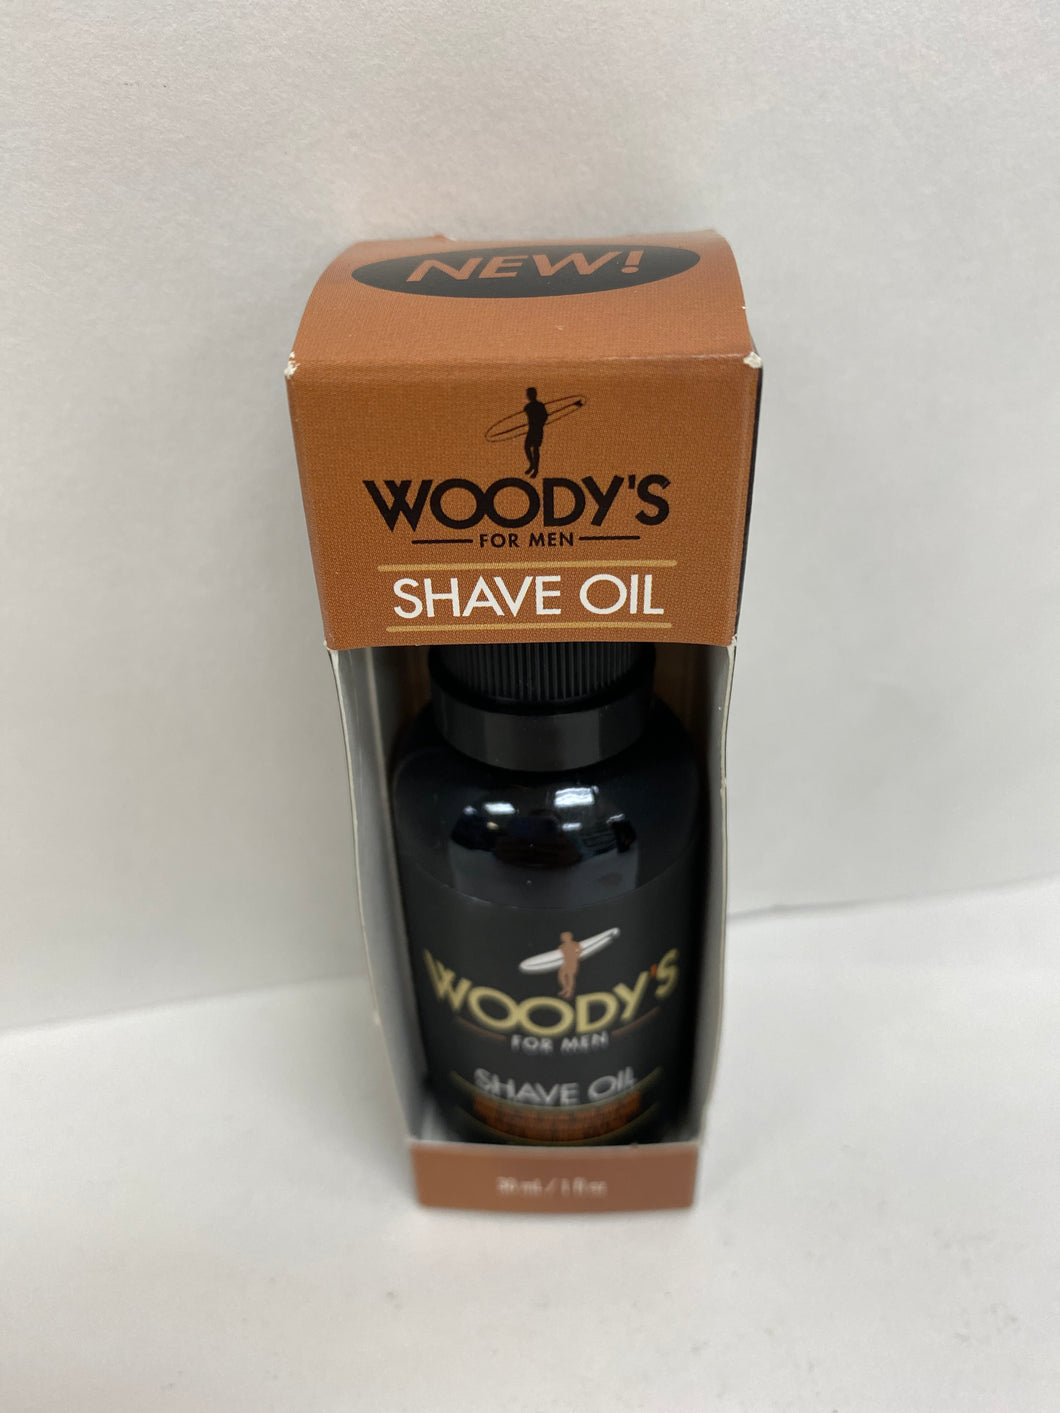 Woody’s For Men Shave Oil